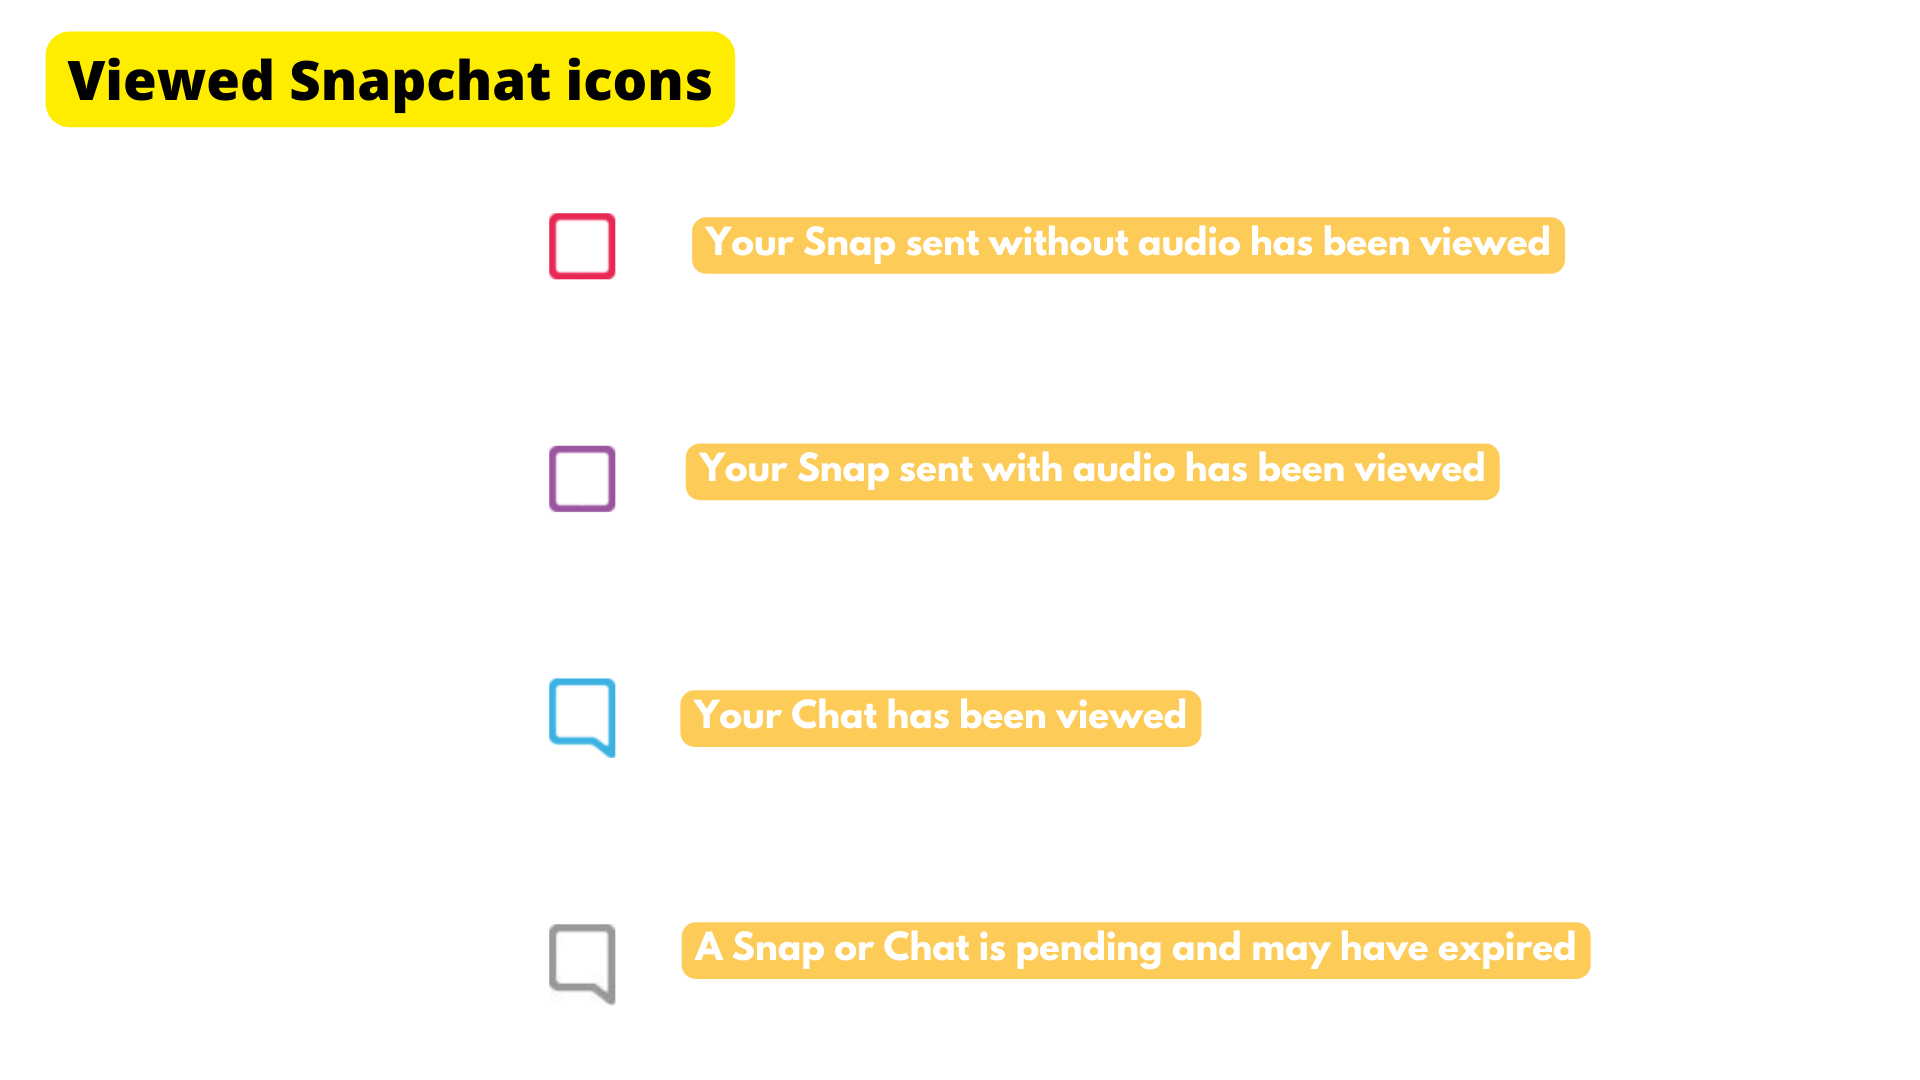 viewed snapchat icons meaning